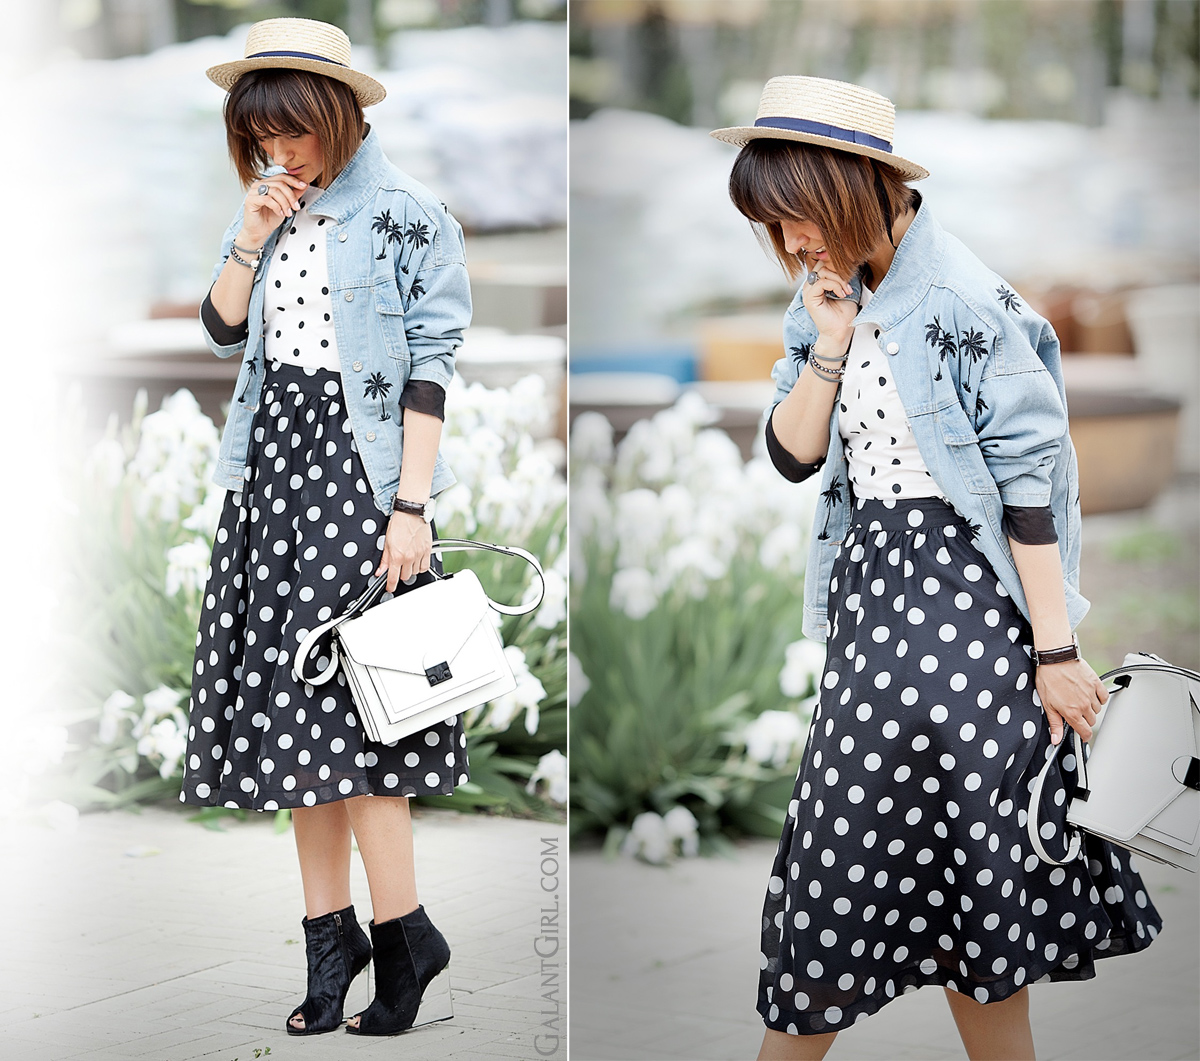 street chic, street chic outfit, street style fashion, galant girl, polka dots outfit,  spring 2015 outfit, 